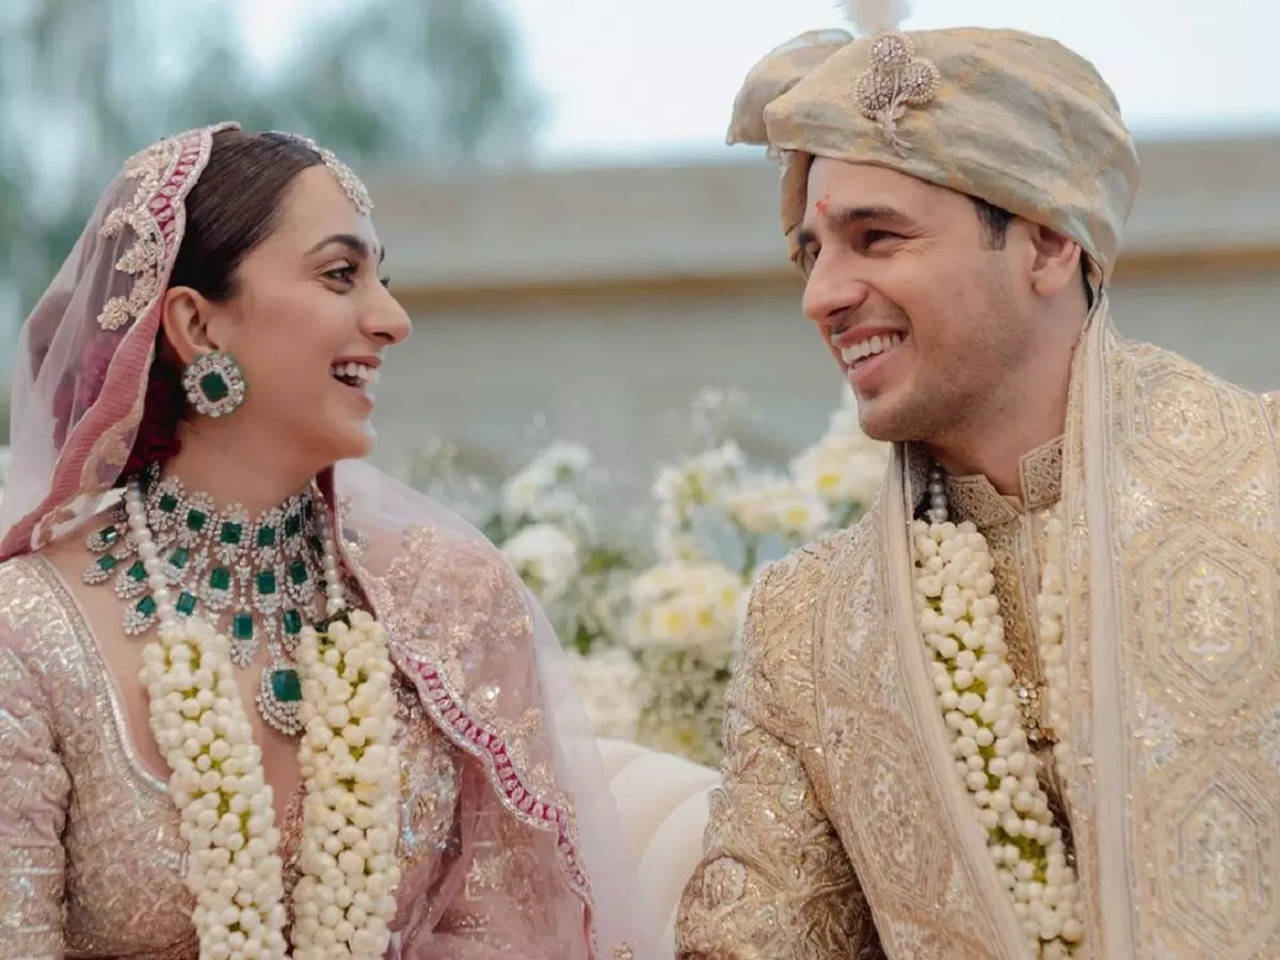 Kiara Advani changes Instagram DP with an adorable pic with husband Sidharth Malhotra | Hindi Movie News - Times of India